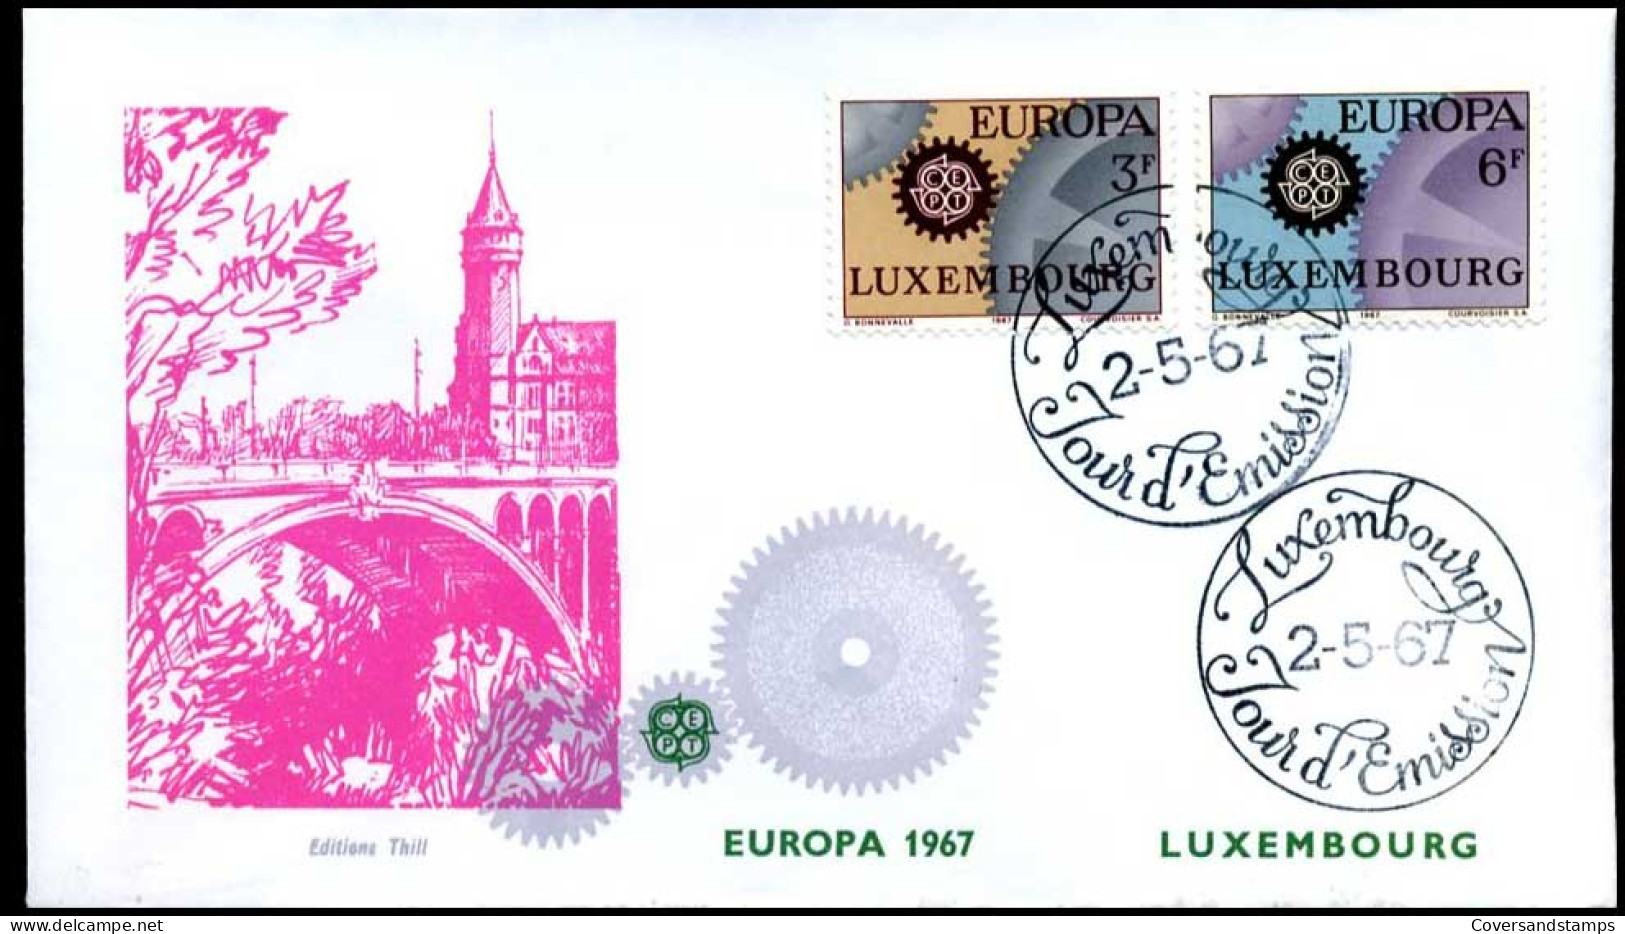  Luxembourg - FDC - Europa CEPT 1967 - 1967